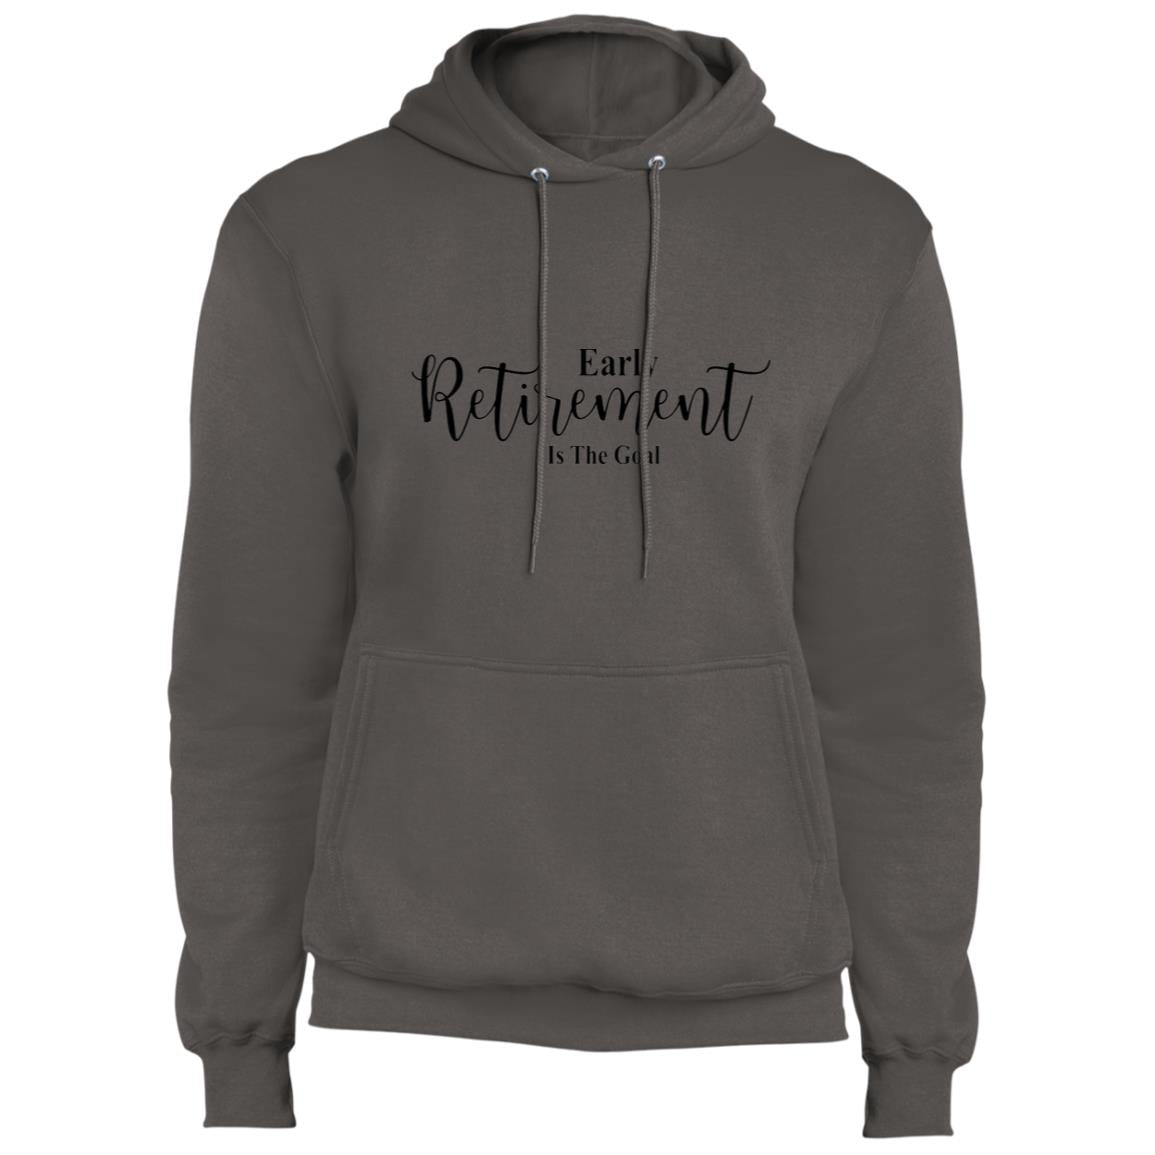 Early Retirement Is The Goal - Fleece Pullover Hoodie